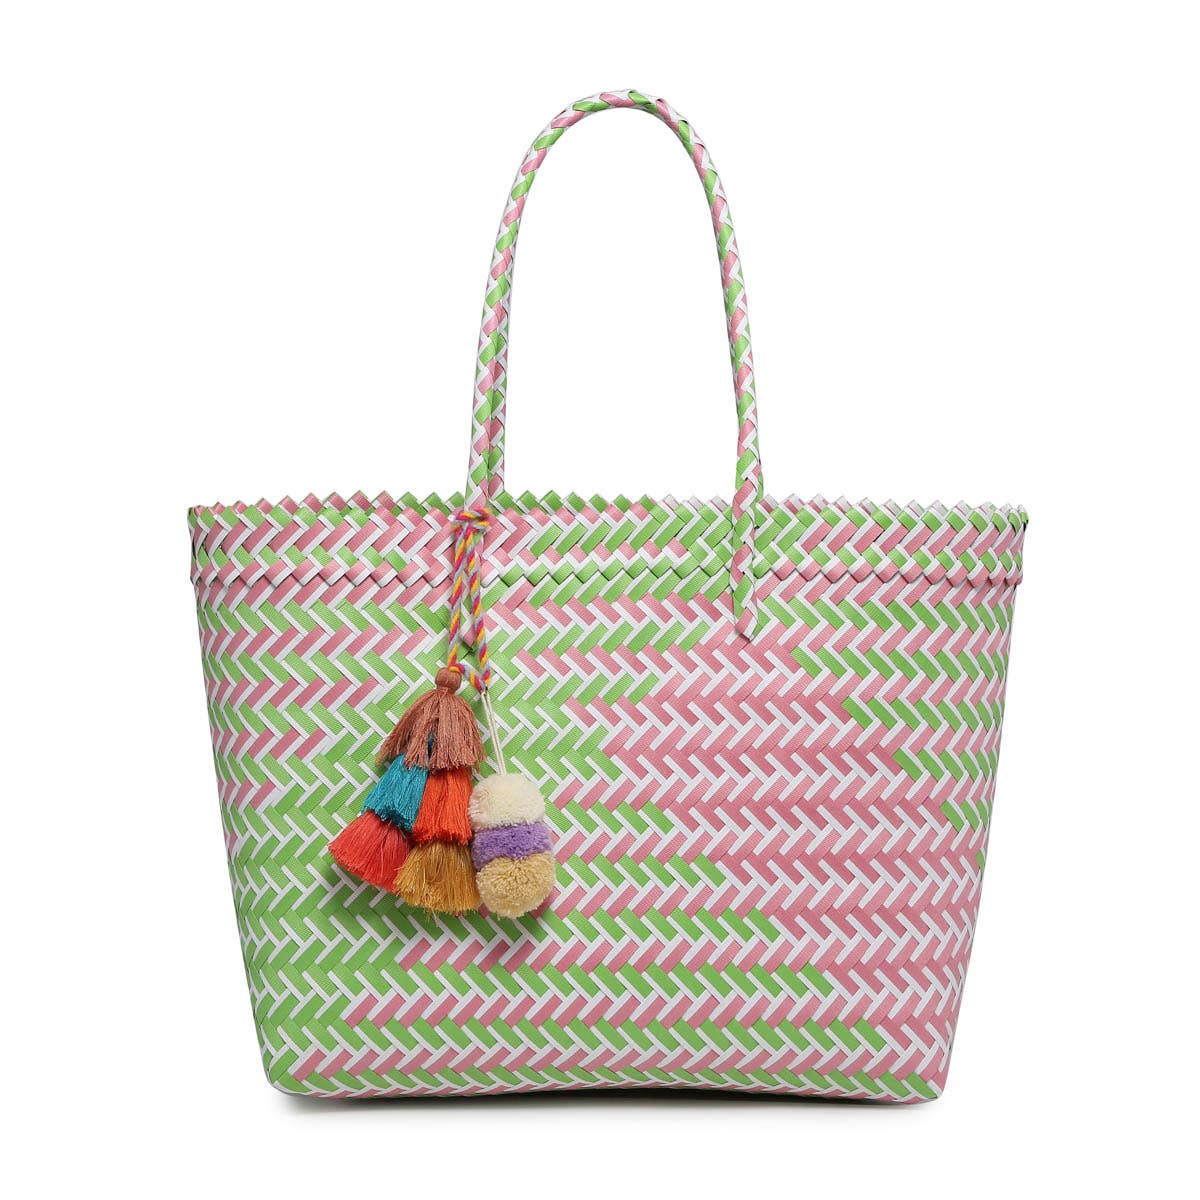 Shelby Large Handwoven Tote w/ Pom-Poms-Pink & Green